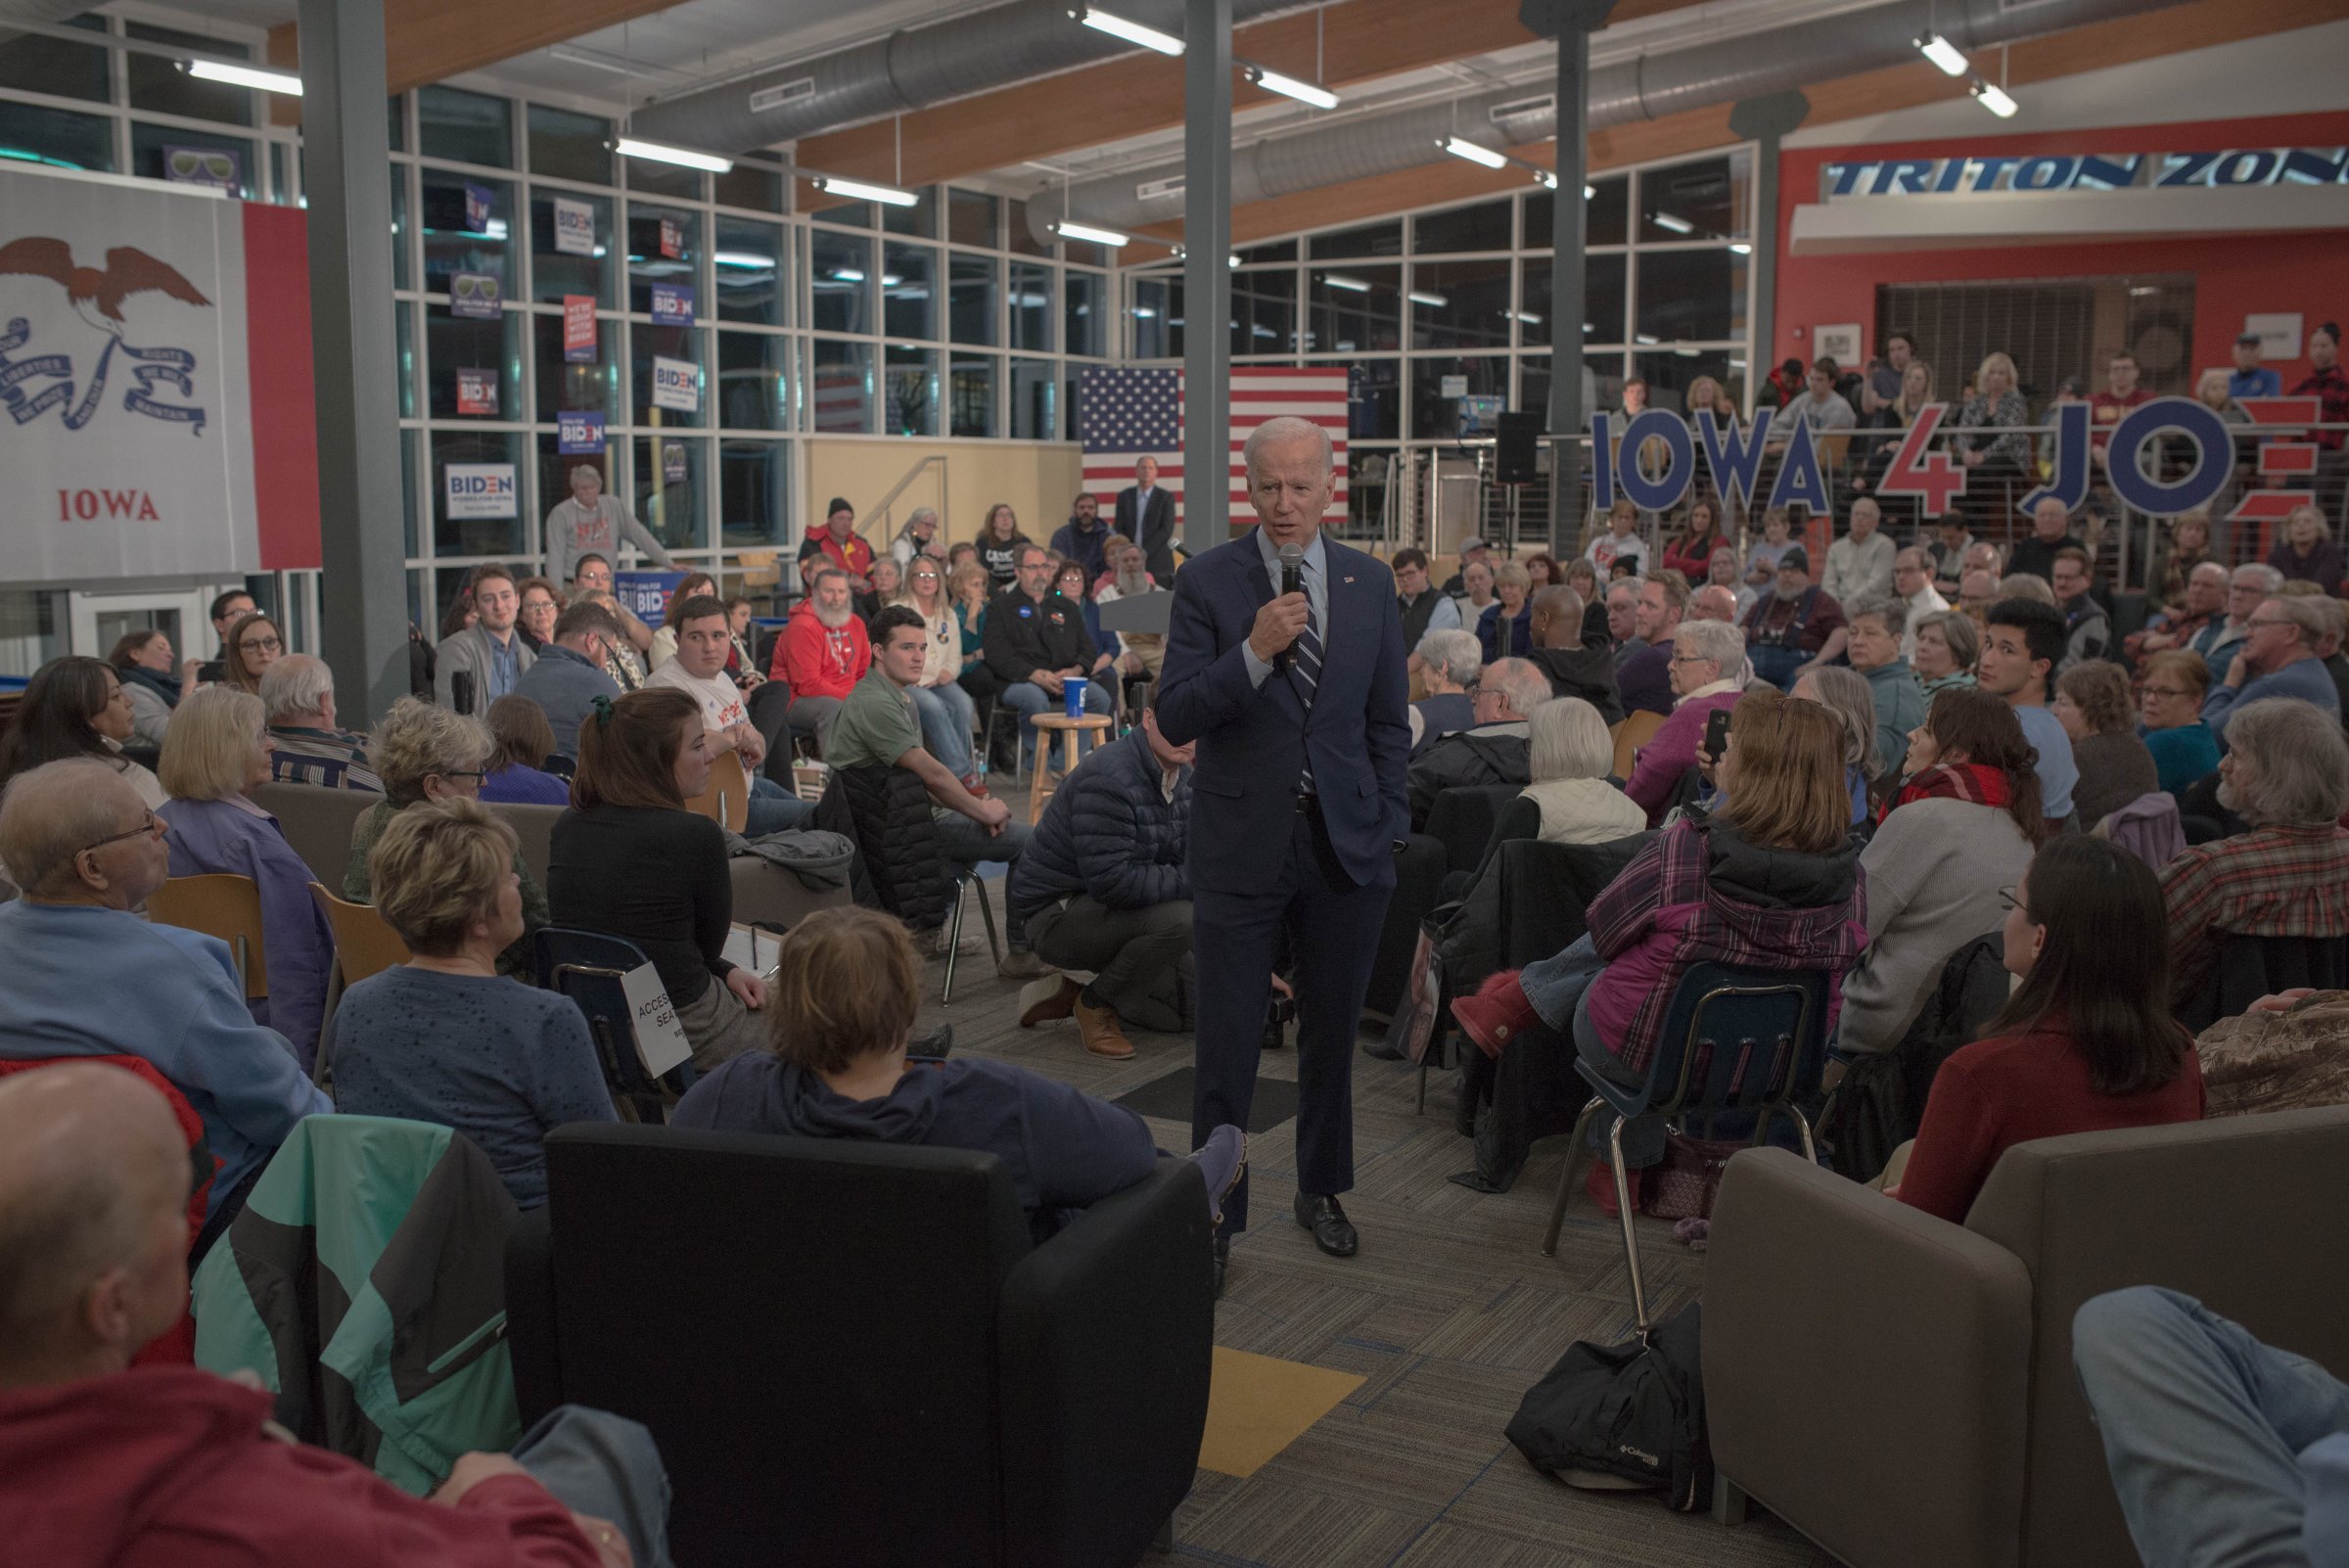 Joe Biden during a community event in Fort Dodge, IA on Jan. 21, 2020. Photo by September Dawn Bottoms for TIME.